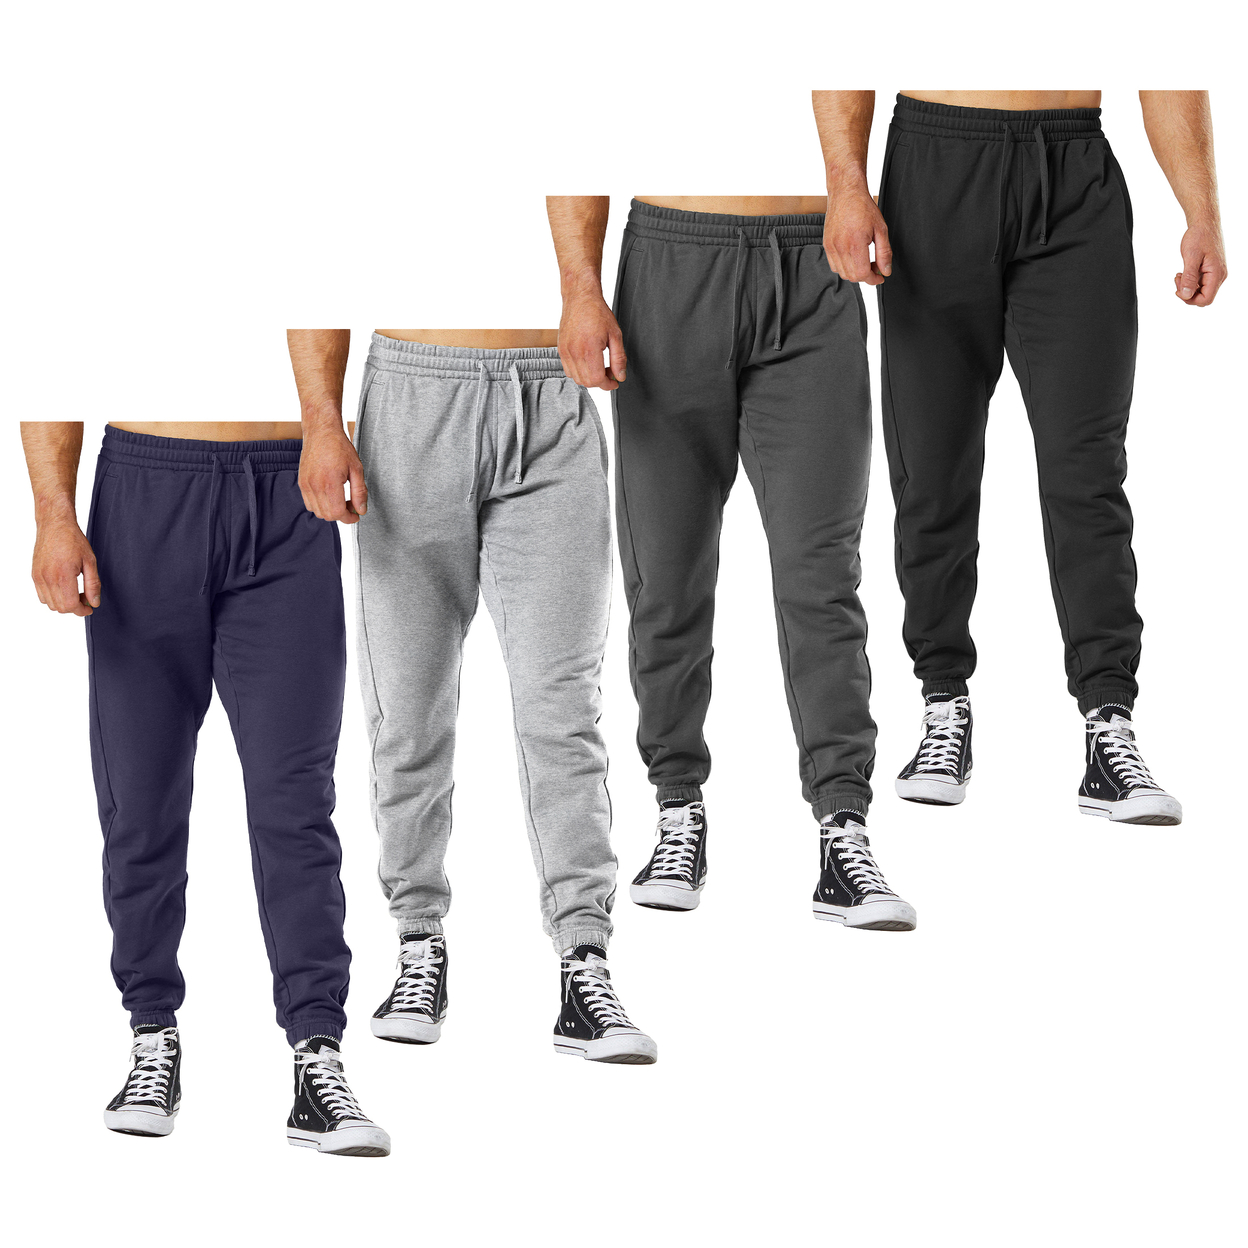 Multi-Pack: Men's Ultra-Soft Cozy Winter Warm Casual Fleece-Lined Sweatpants Jogger - 1-pack, Large